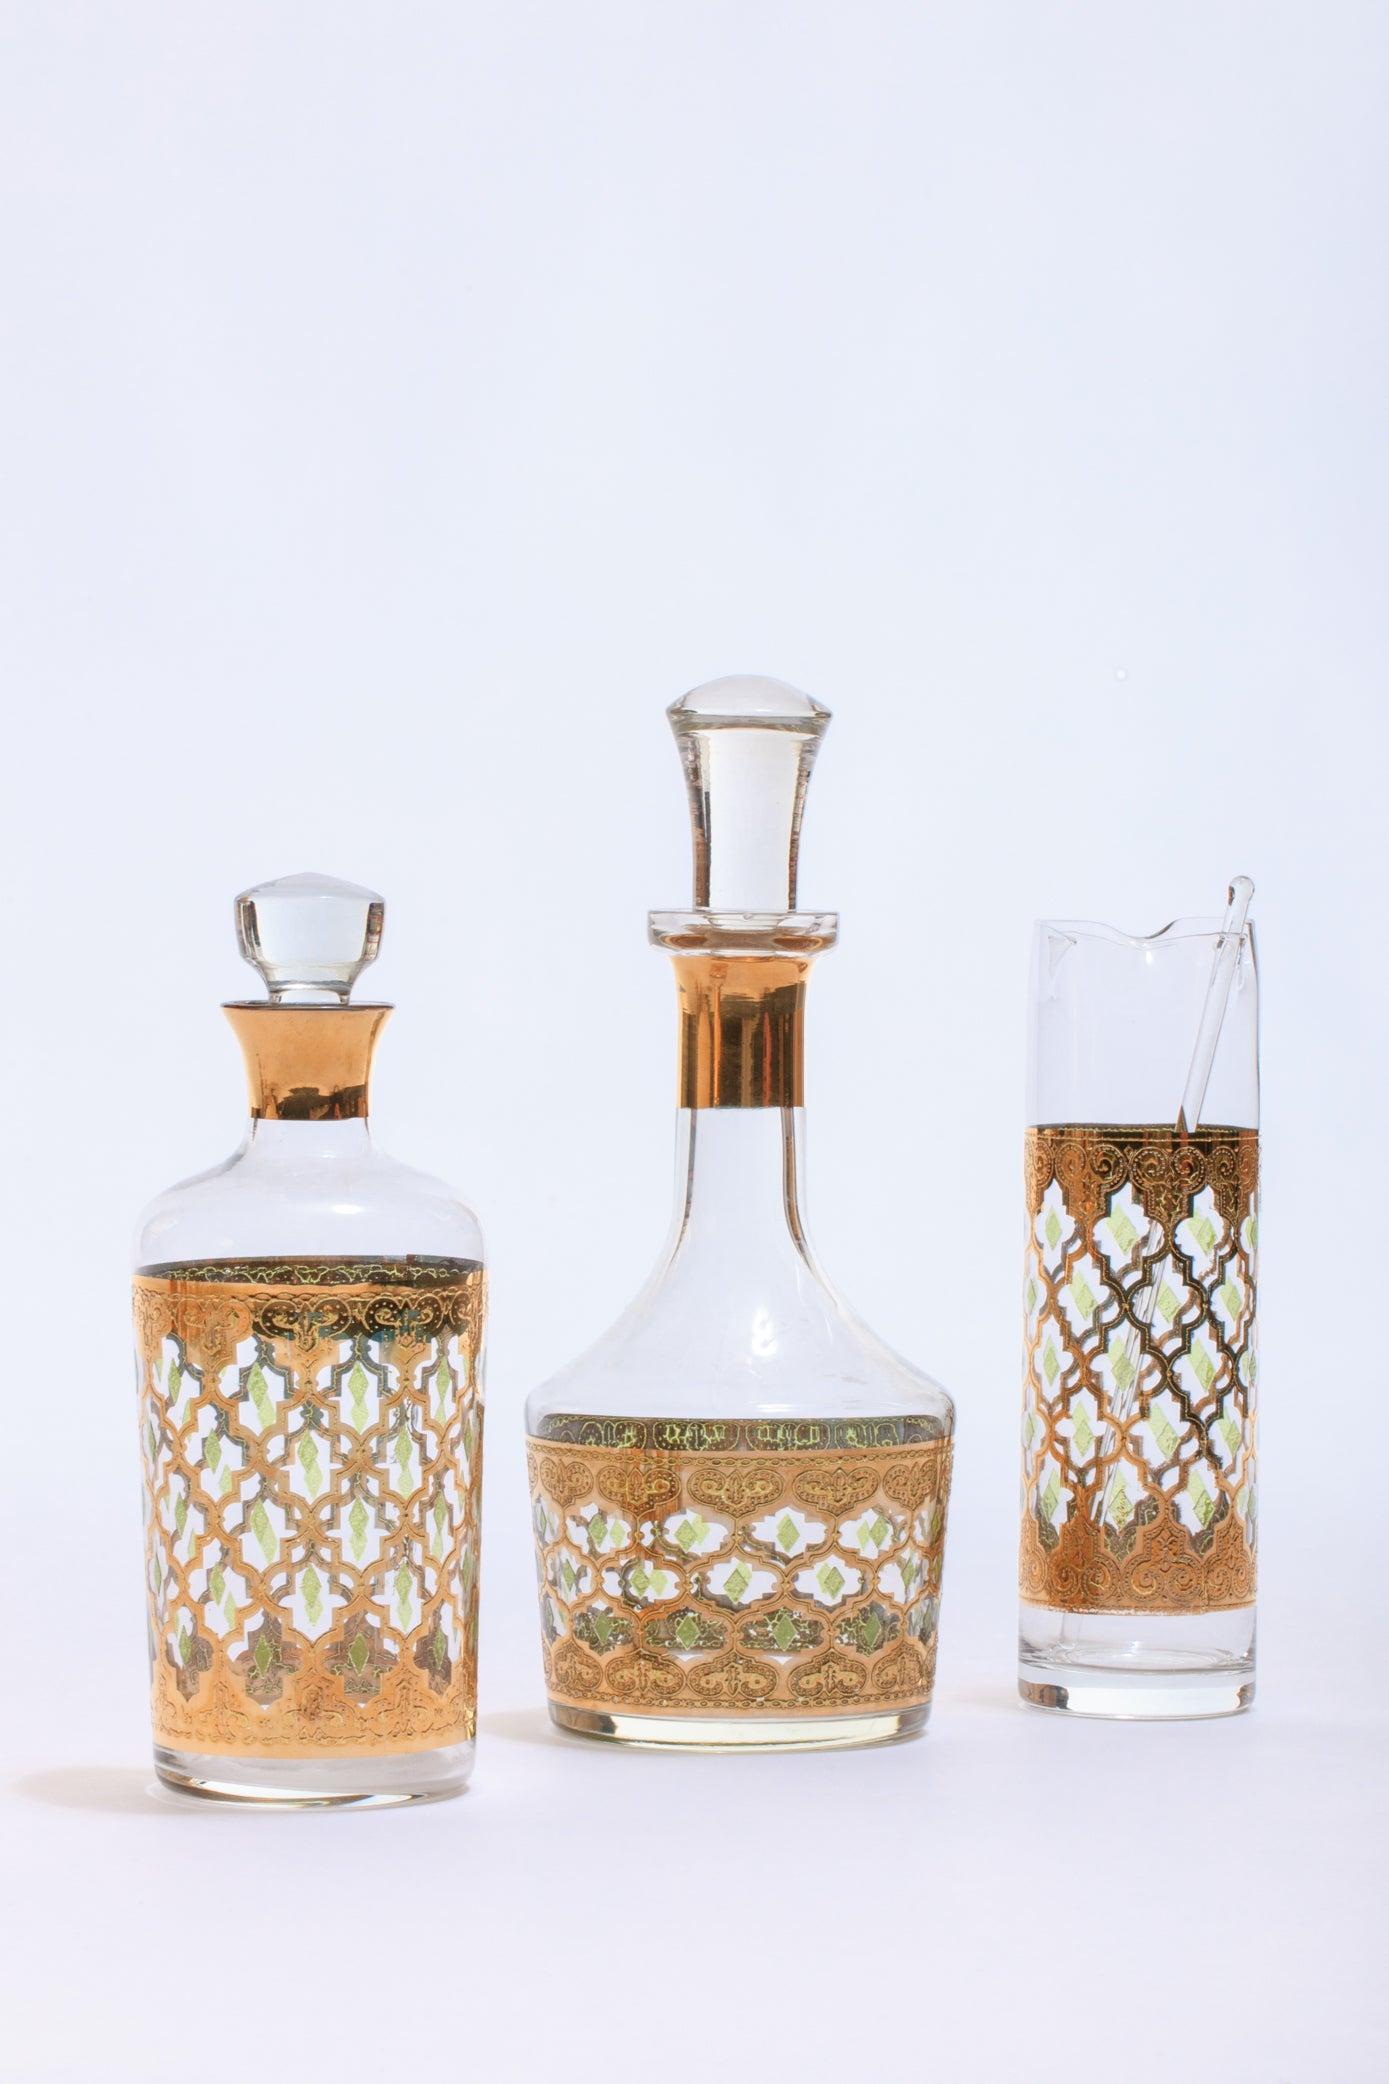 Beautiful Moroccan themed spirits or wine decanter. The decanter shows no wear and is in great condition. This style was showcased in the feature film 